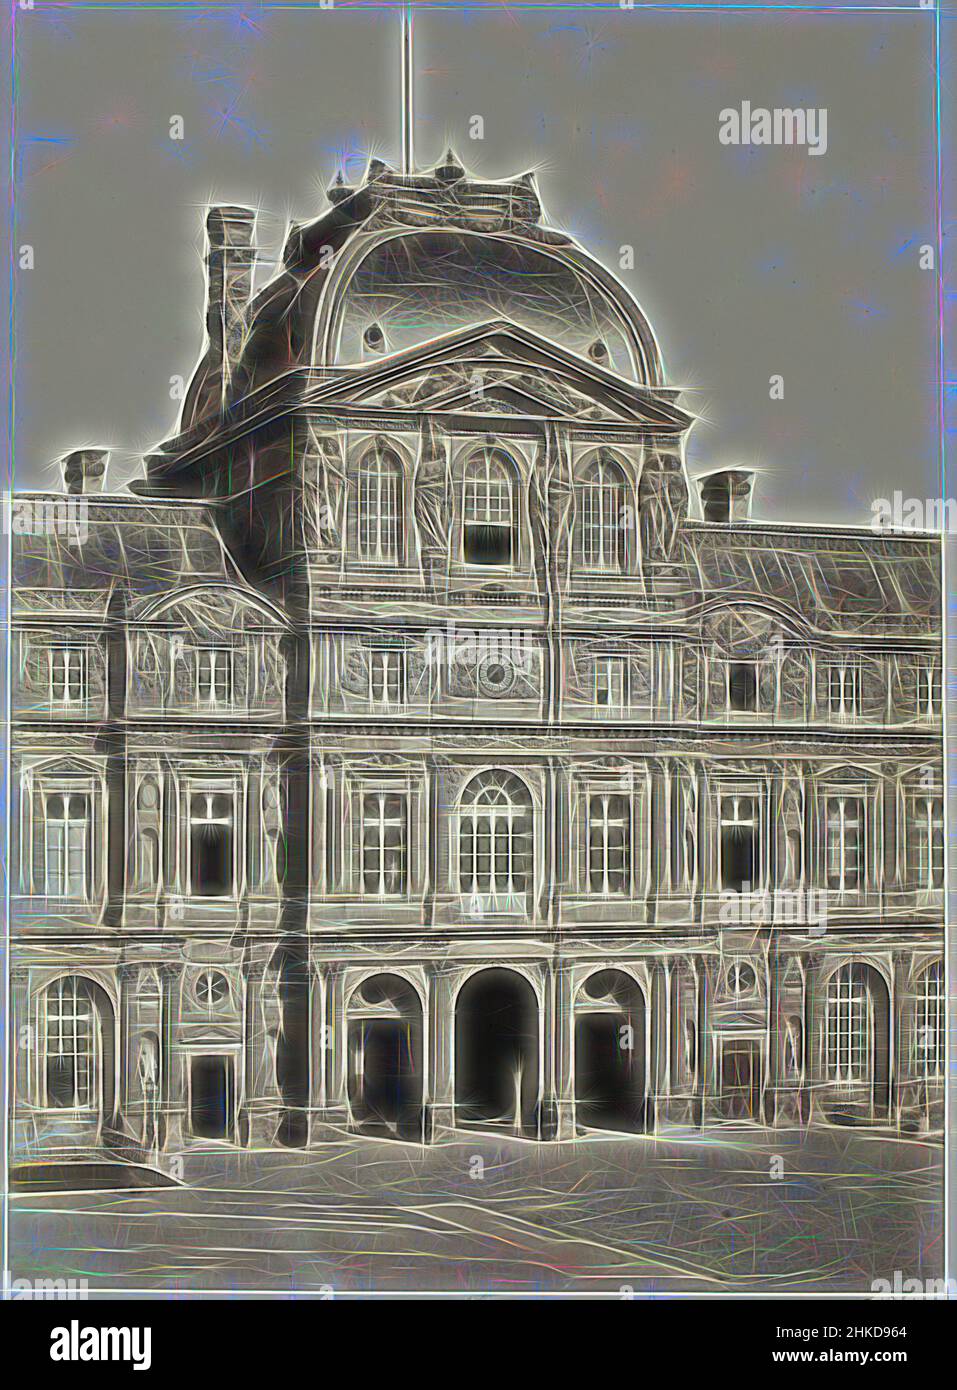 Inspired by Pavilion of the Louvre, Paris, Louvre, Édouard Denis Baldus, Paris, 1855 - 1857, paper, salted paper print, height 275 mm × width 204 mmheight 434 mm × width 333 mm, Reimagined by Artotop. Classic art reinvented with a modern twist. Design of warm cheerful glowing of brightness and light ray radiance. Photography inspired by surrealism and futurism, embracing dynamic energy of modern technology, movement, speed and revolutionize culture Stock Photo